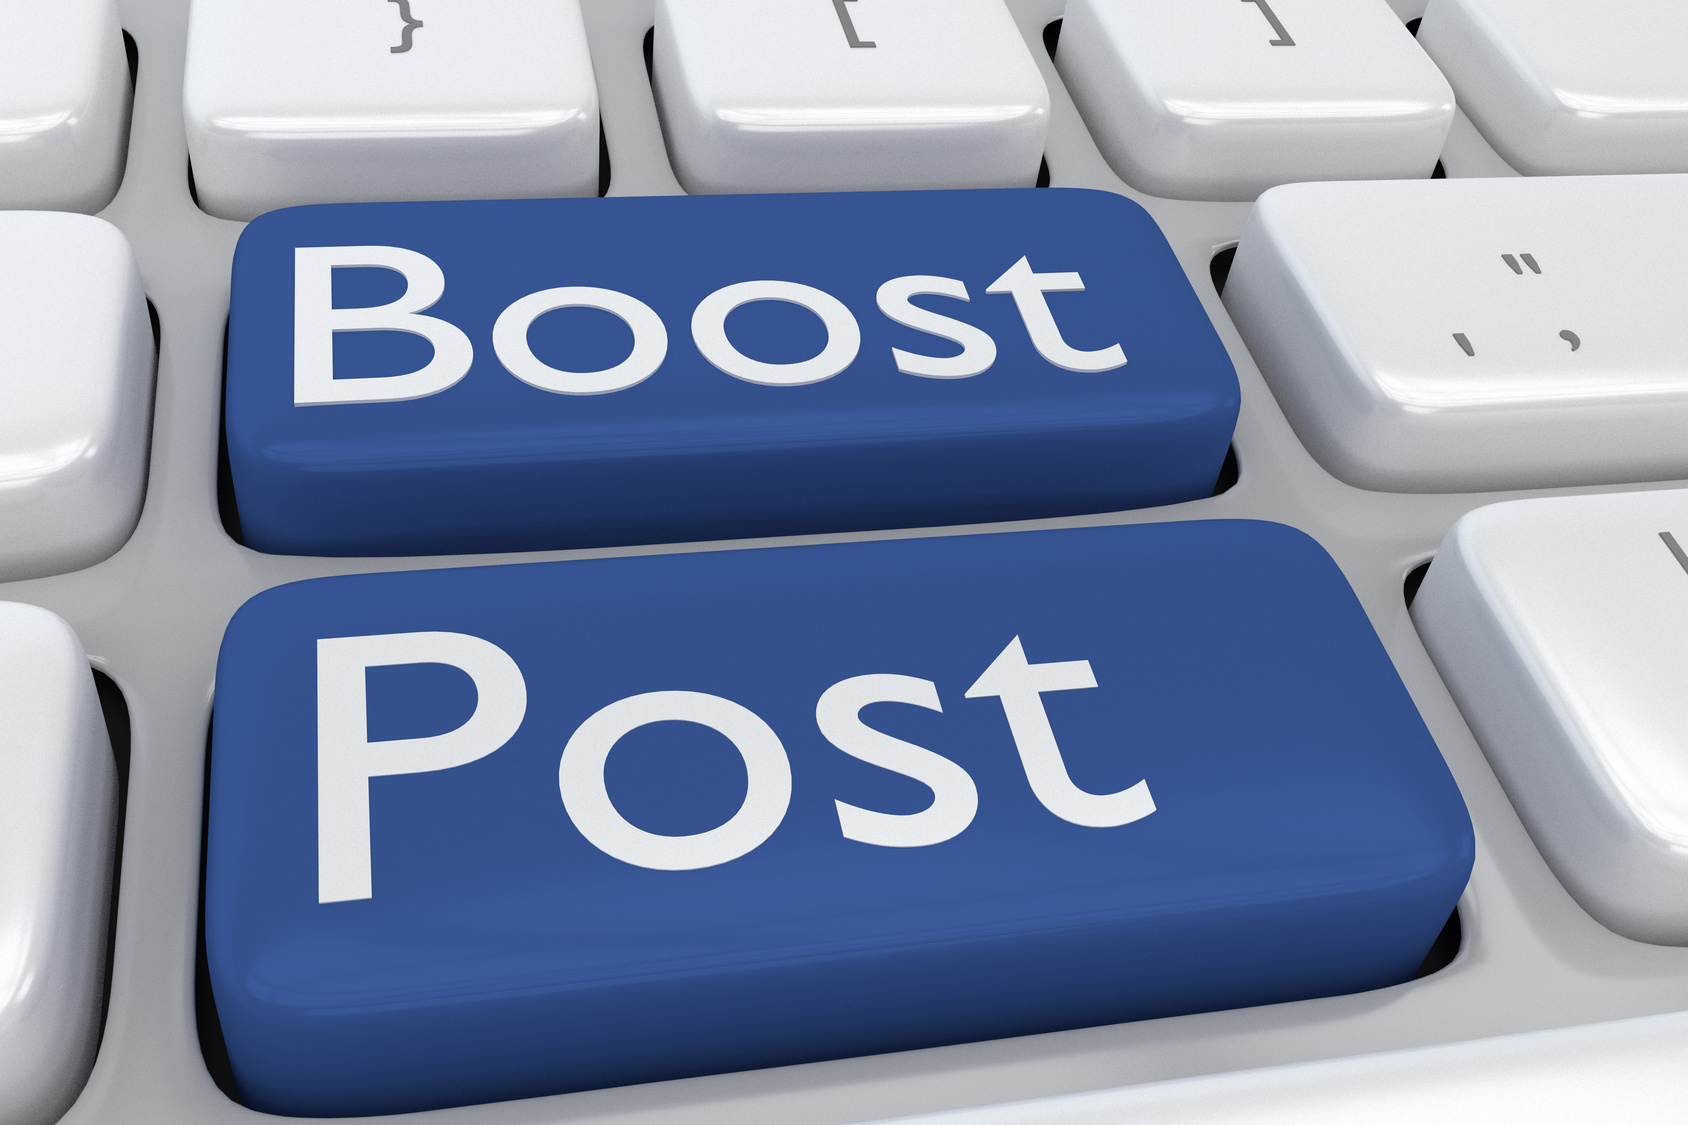 Facebook Advertising Boosted Post When to Boost post